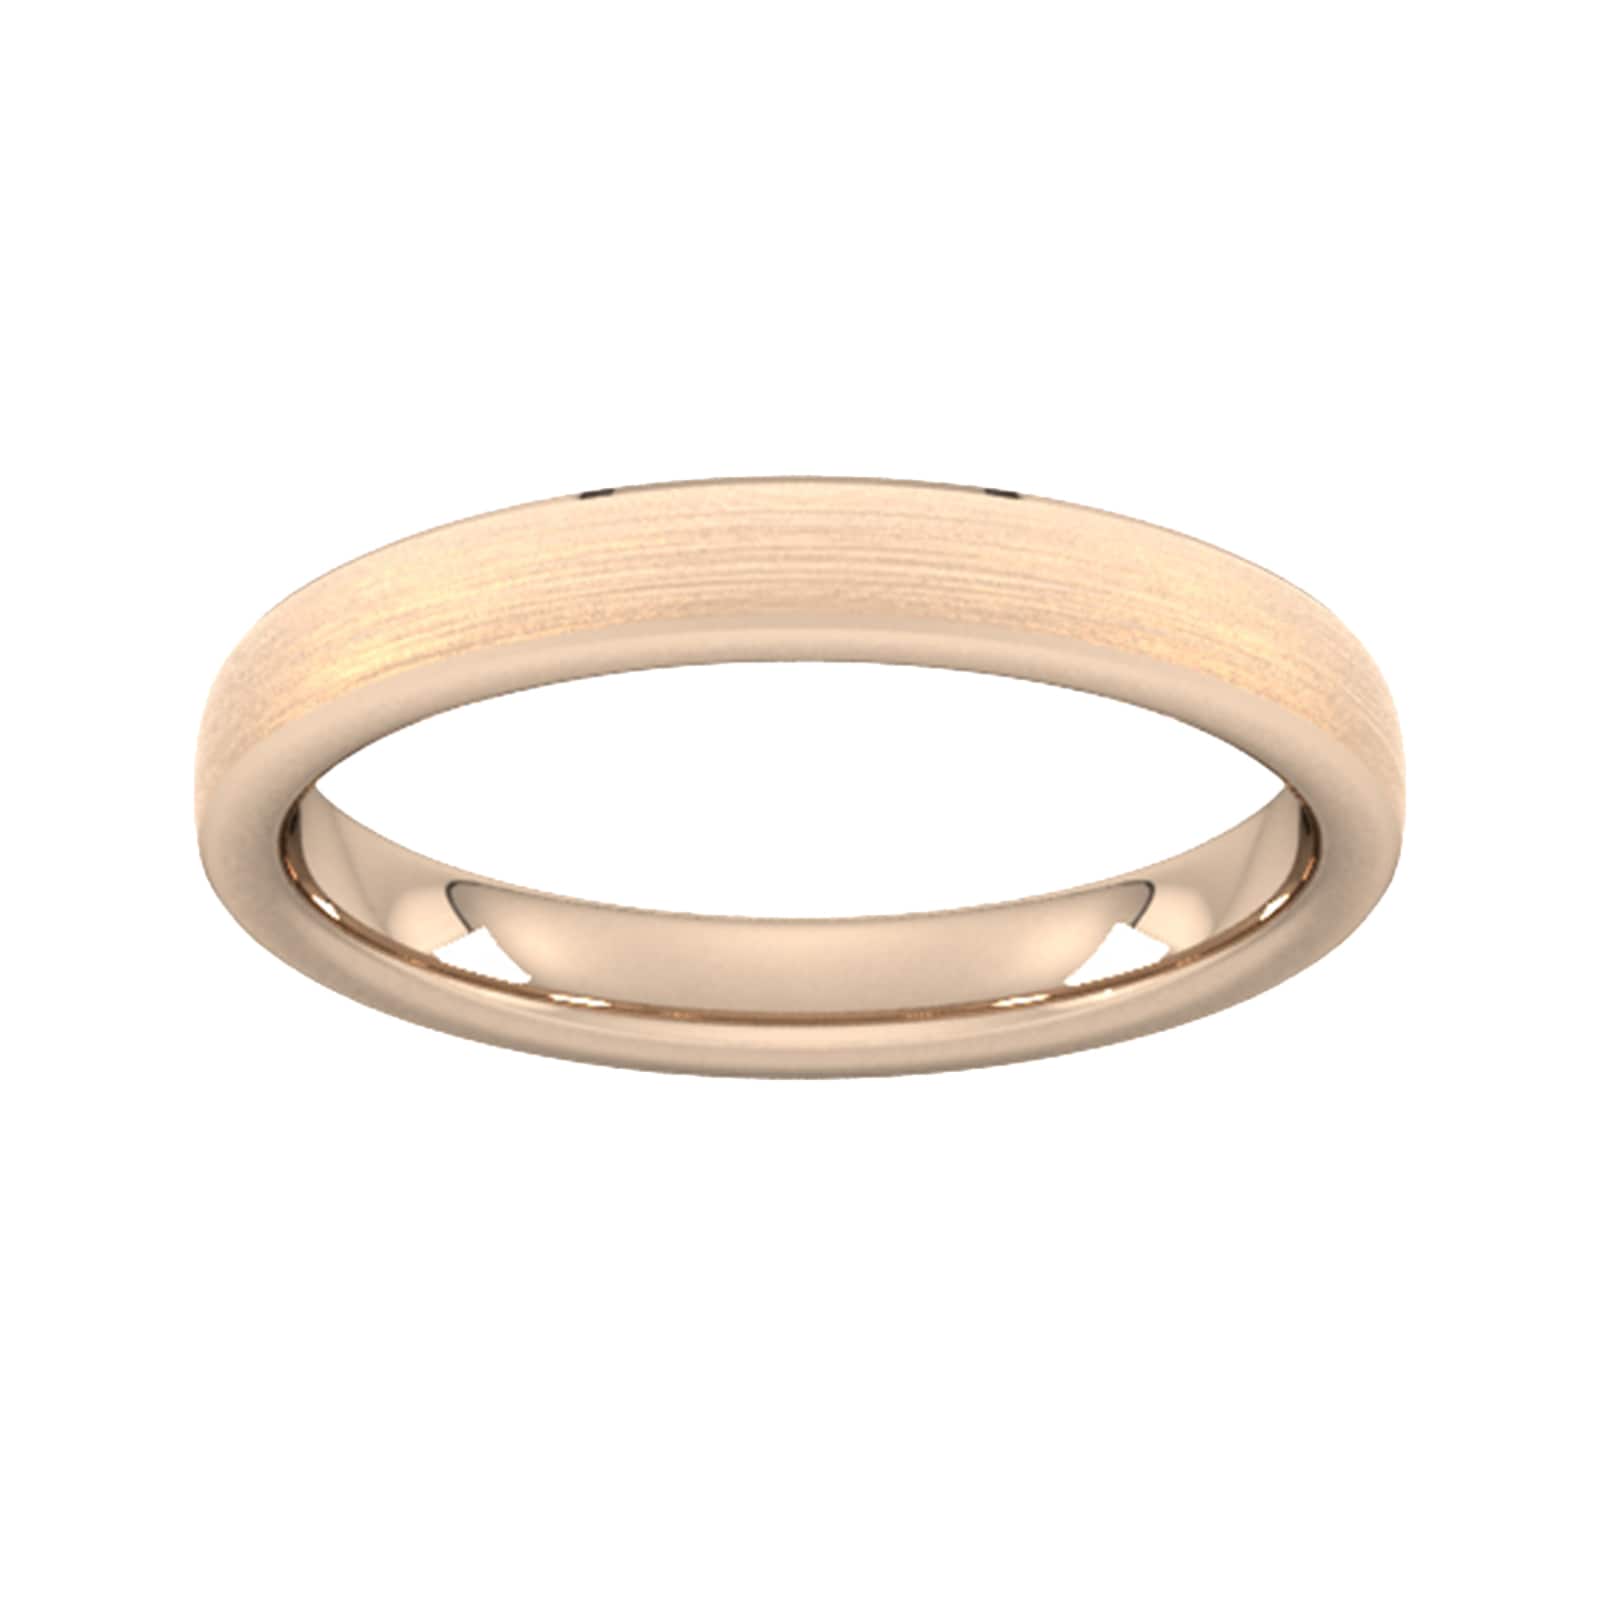 3mm Traditional Court Heavy Polished Chamfered Edges With Matt Centre Wedding Ring In 9 Carat Rose Gold - Ring Size S